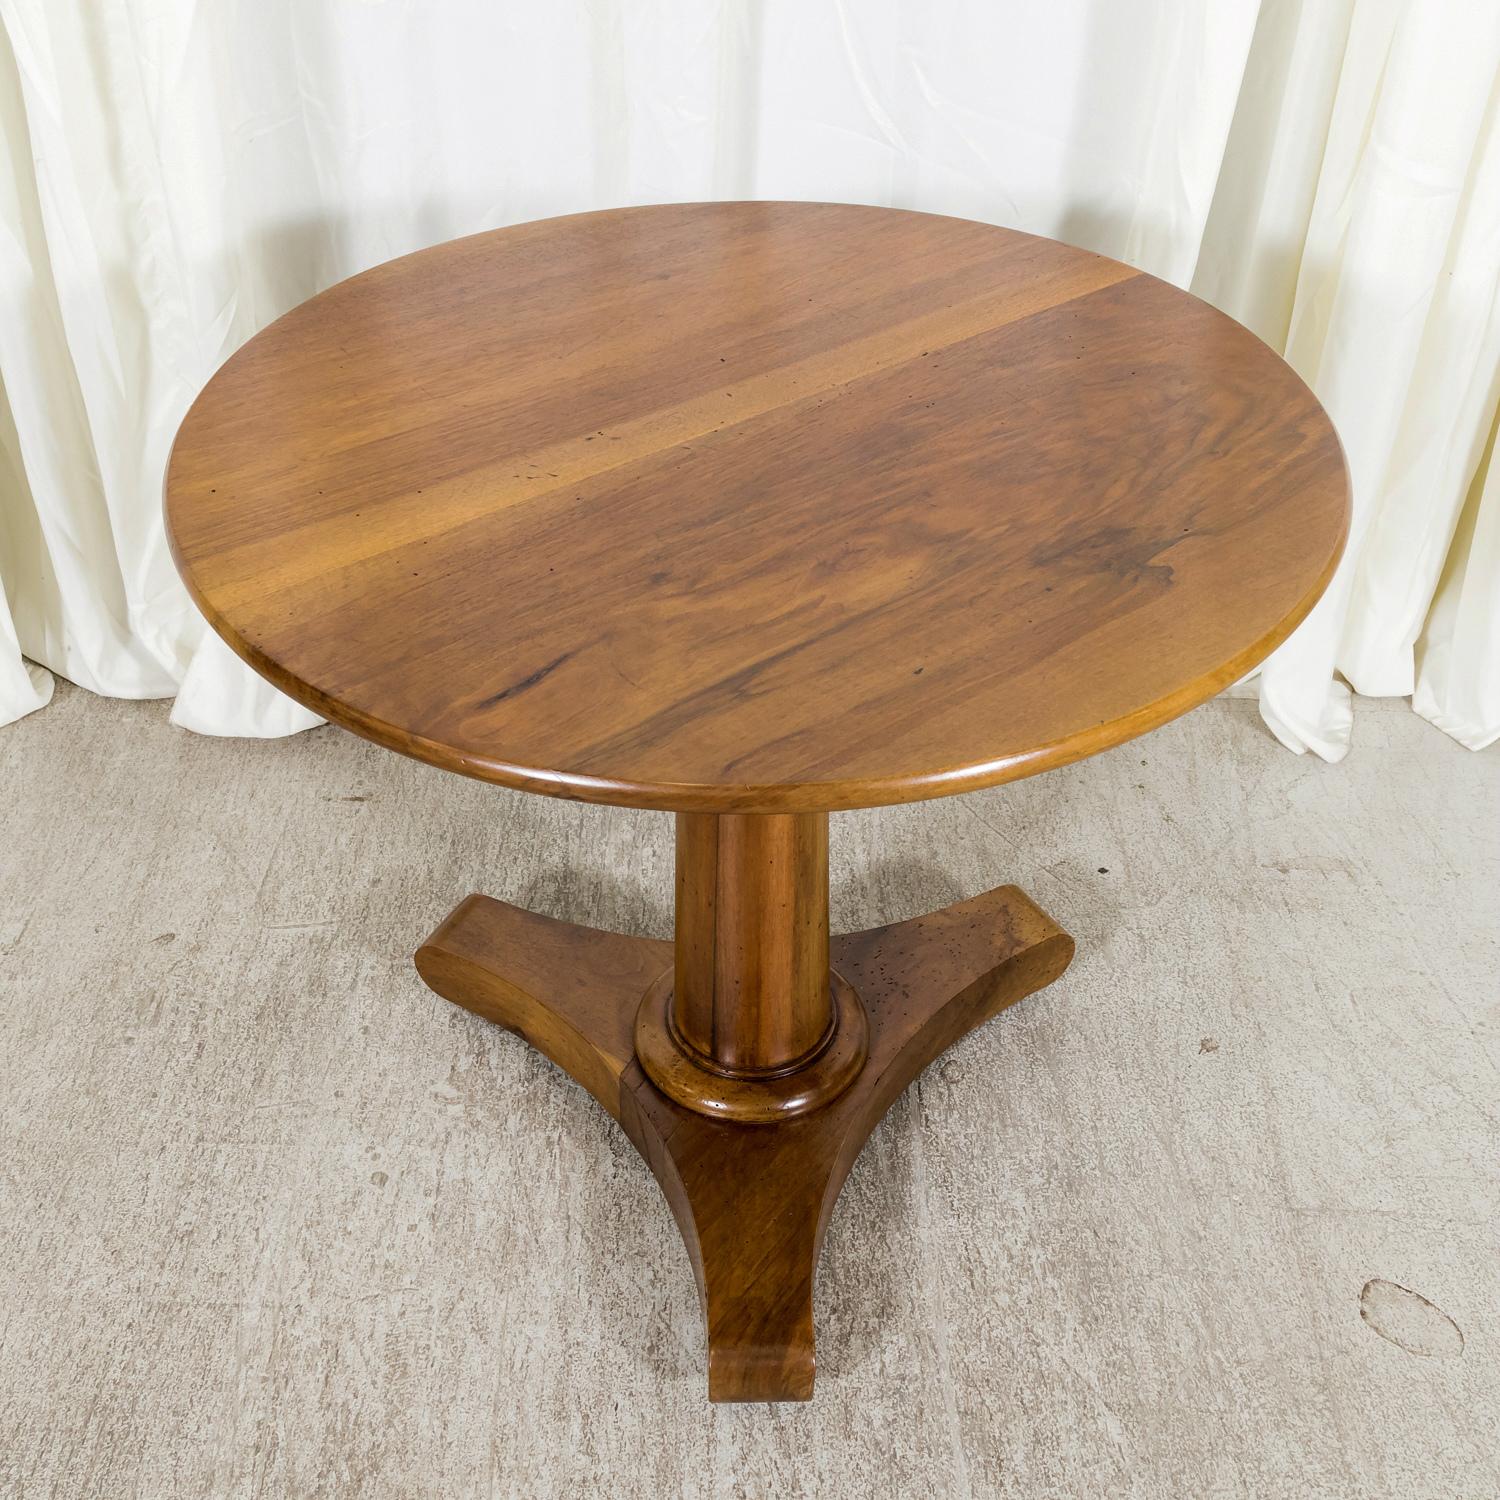 19th Century French Empire Period Solid Walnut Tilt Top Gueridon Side Table 9